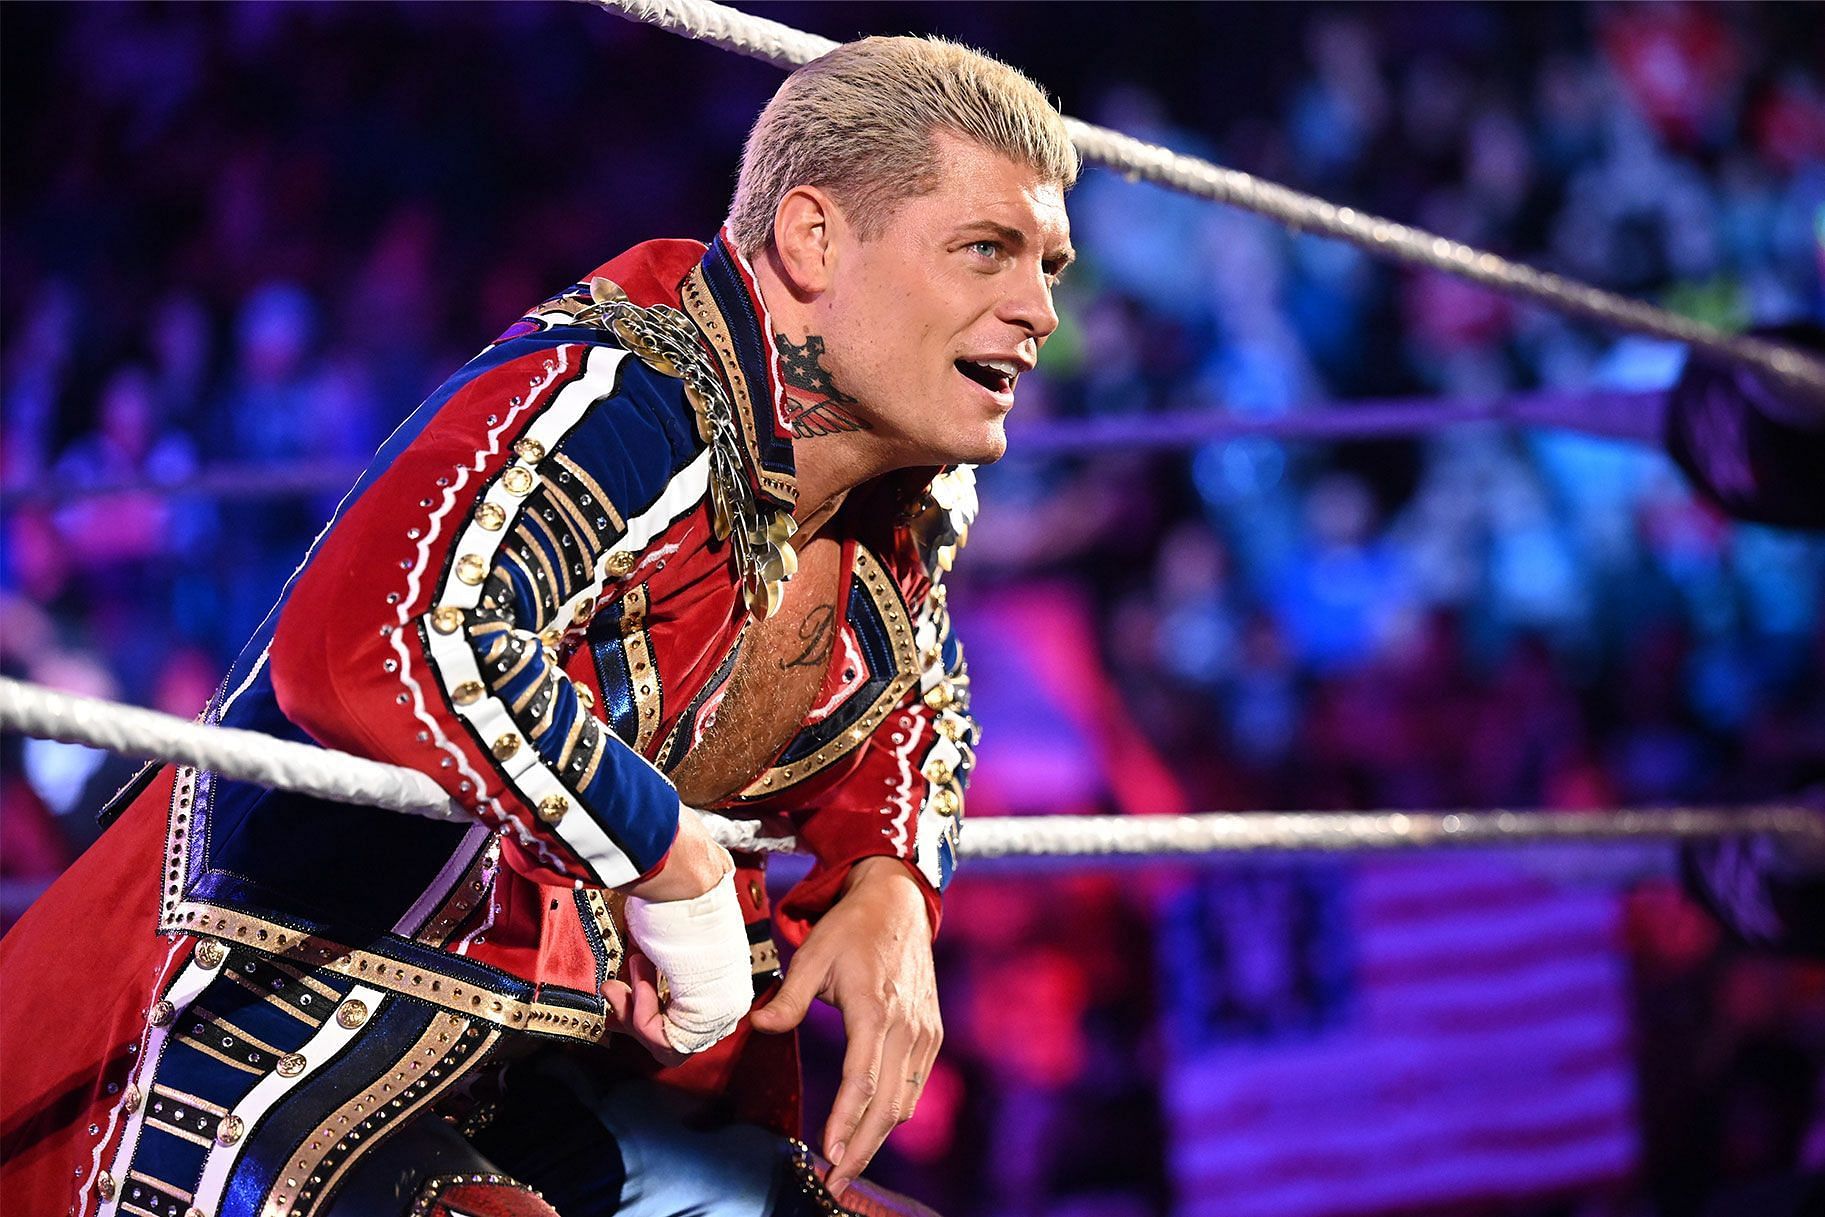 A SmackDown superstar is aiming Cody Rhodes